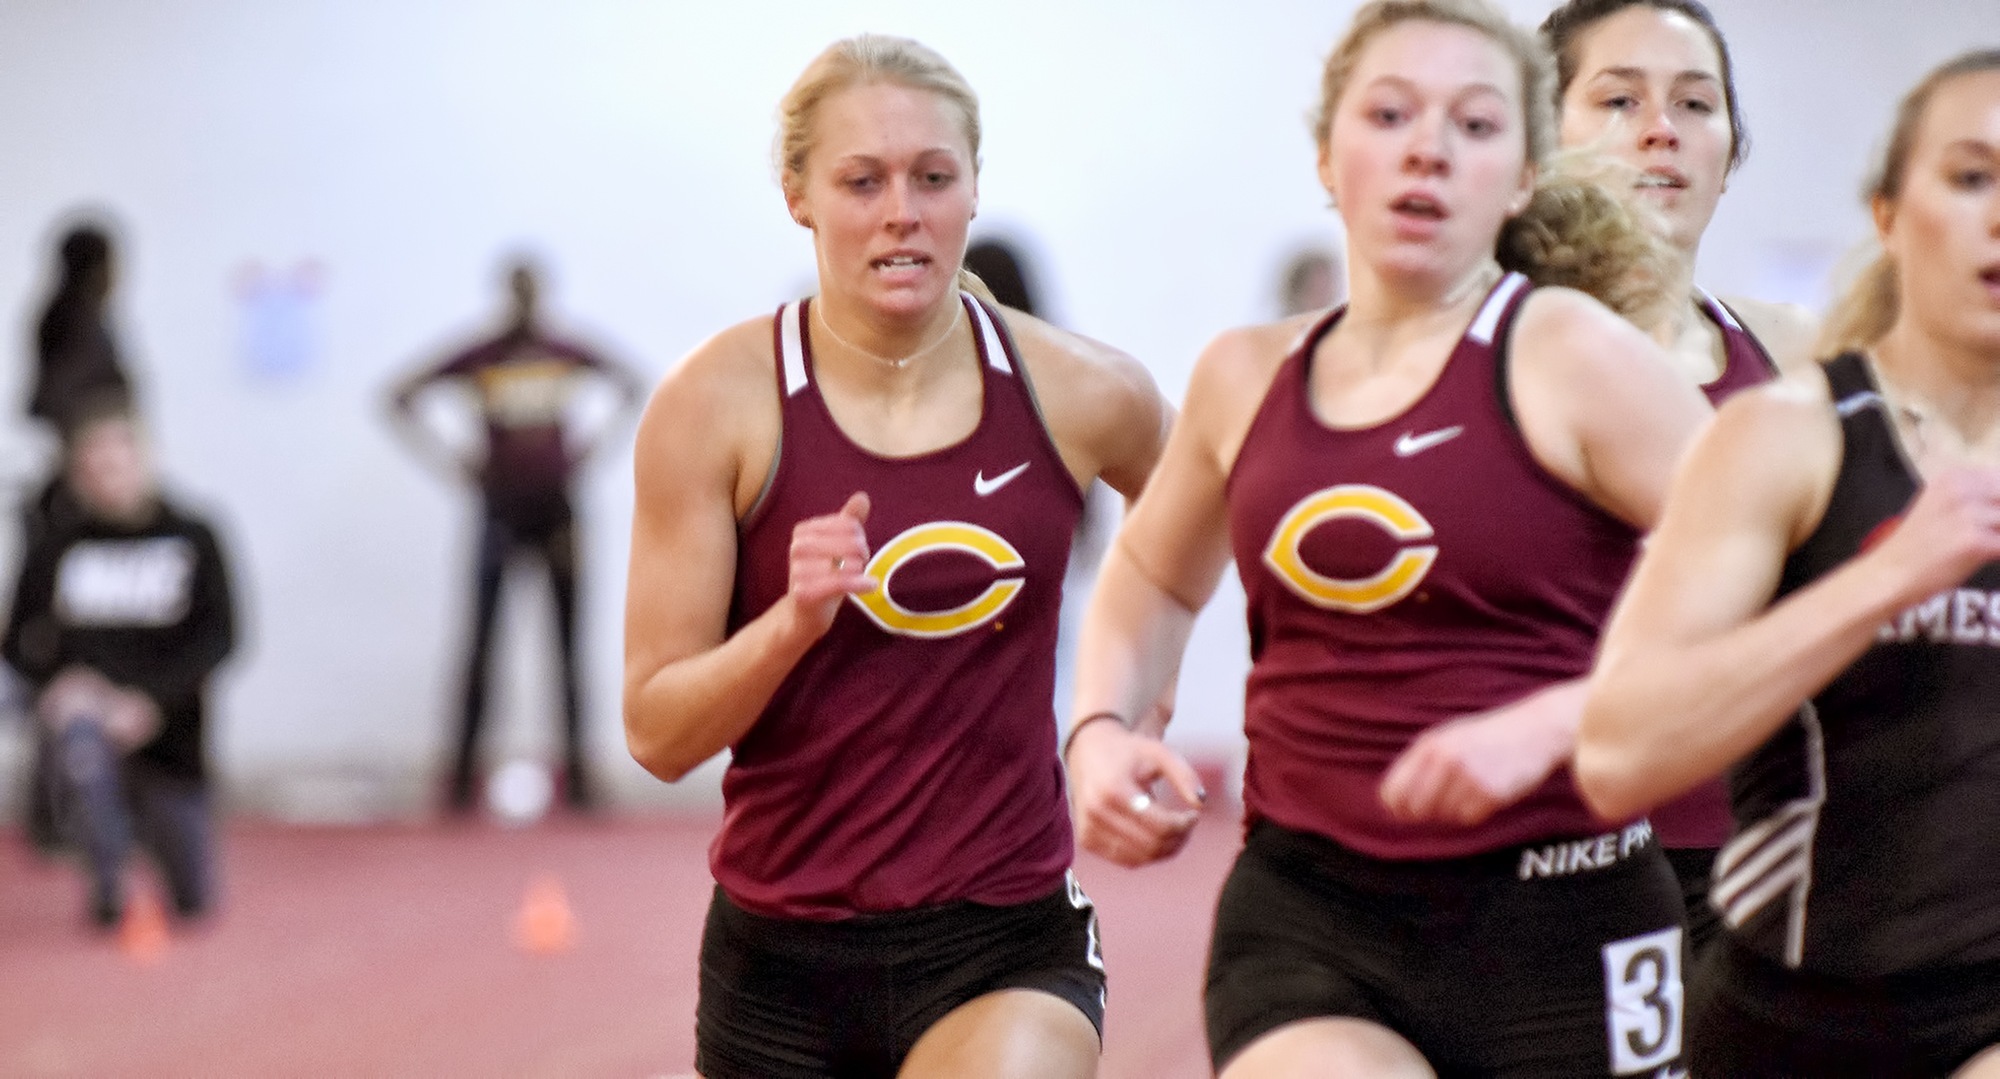 Miriah Forness (L) and Josie Herrmann both put up Top 15 school times in the 800 meters at the UND Tune-Up Meet.